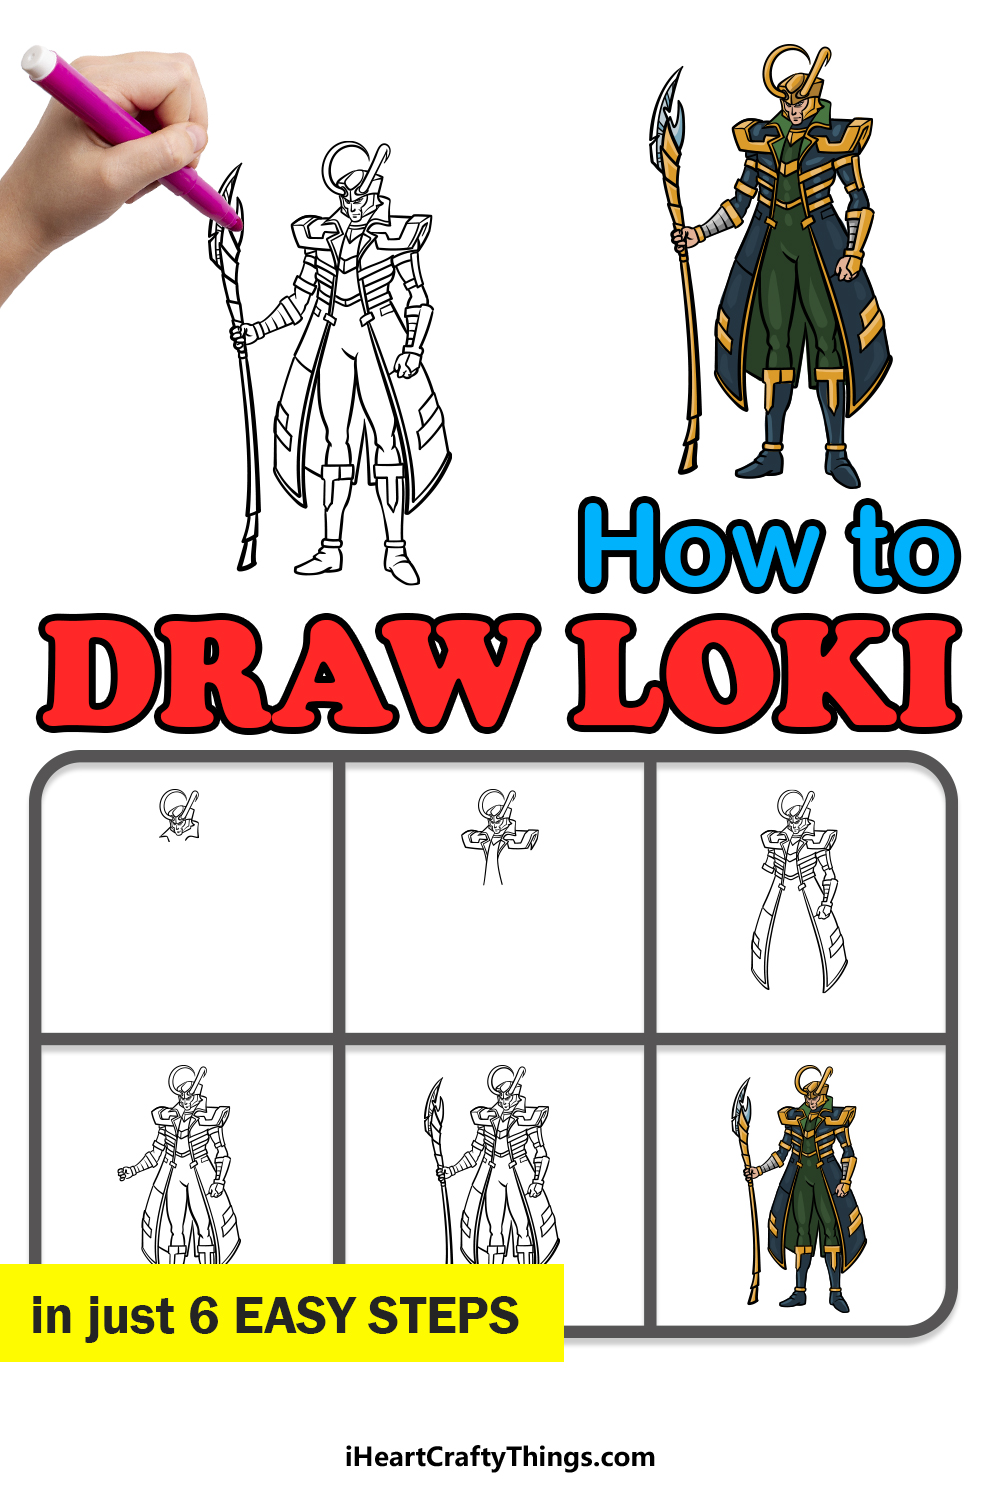 how to draw Loki in 6 easy steps